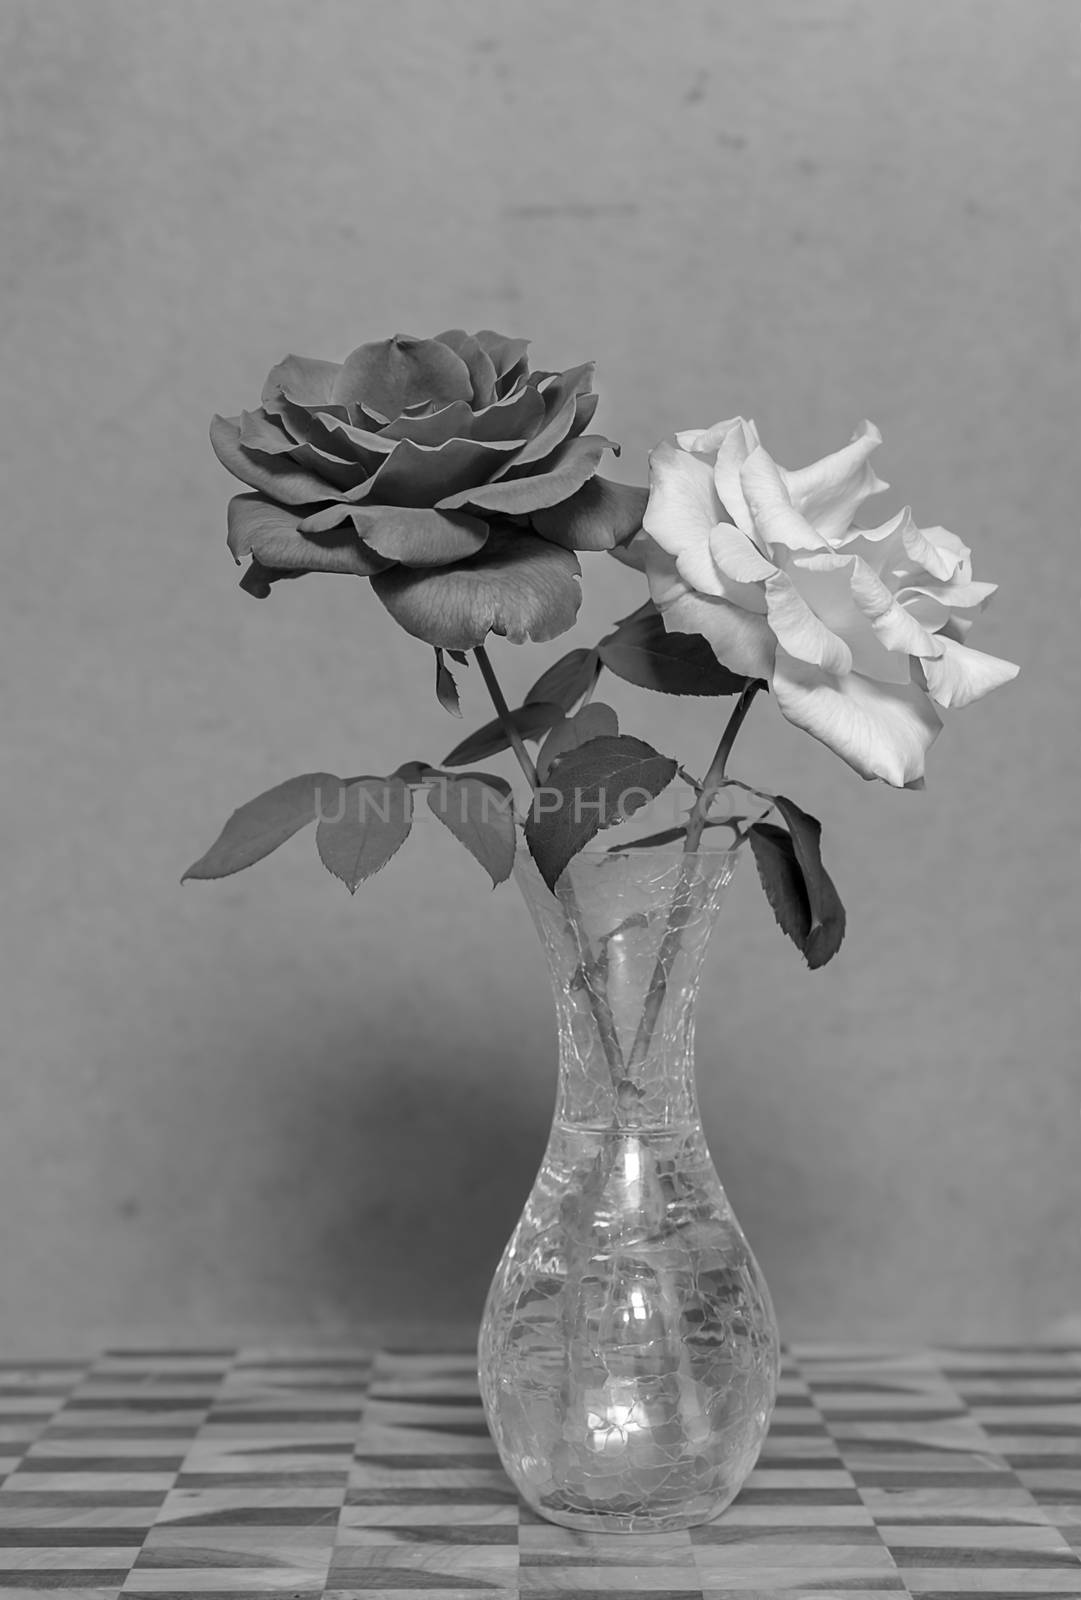 Black and White Rose flowers on Grunge Background by sherj